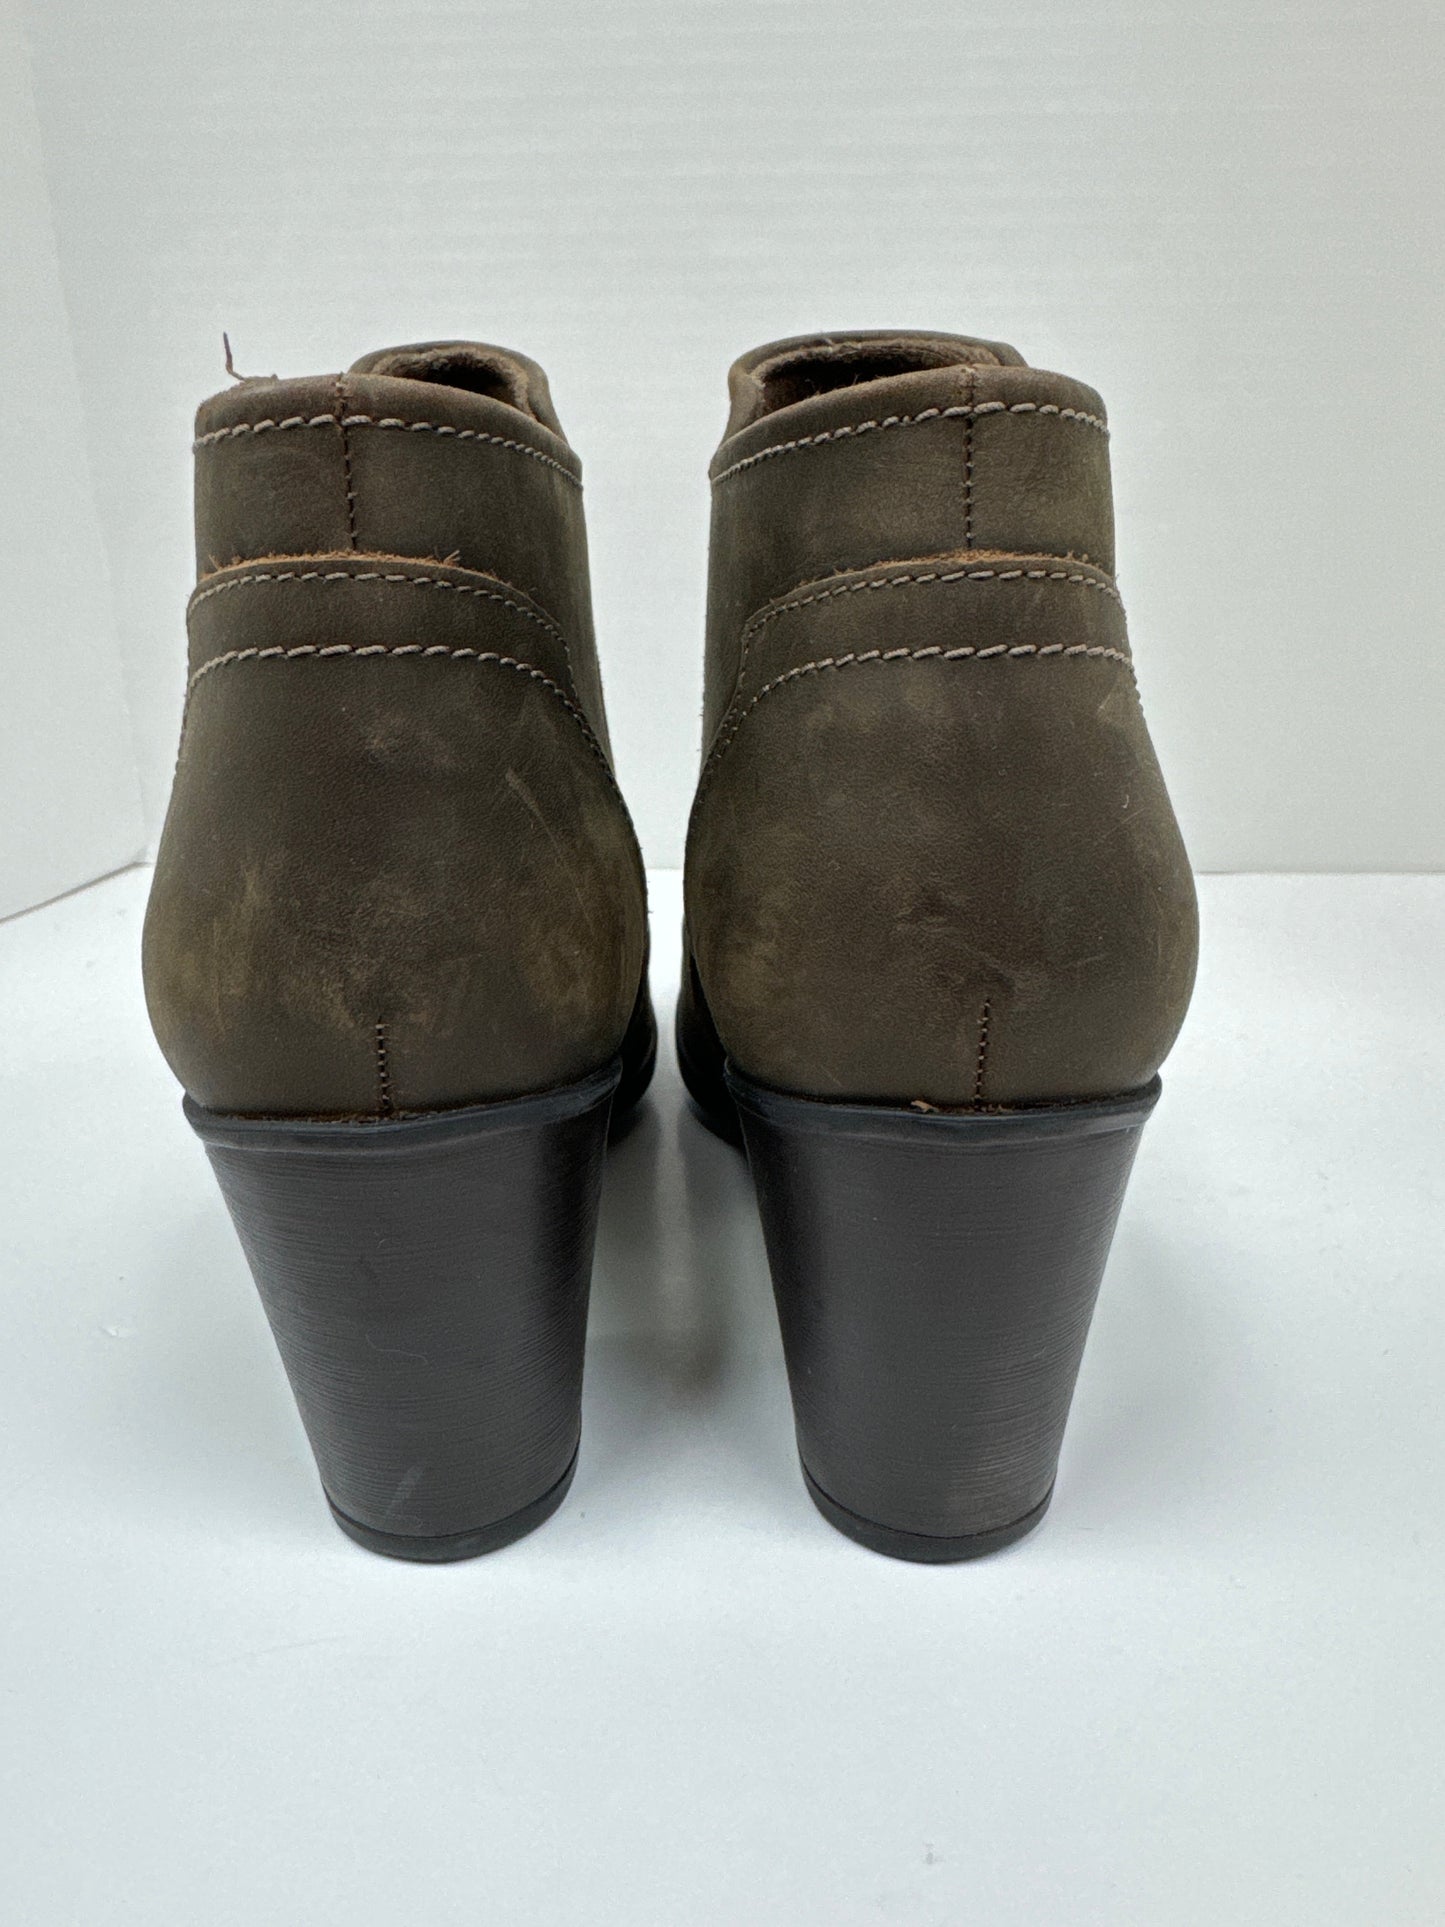 Boots Ankle Heels By Clarks  Size: 9